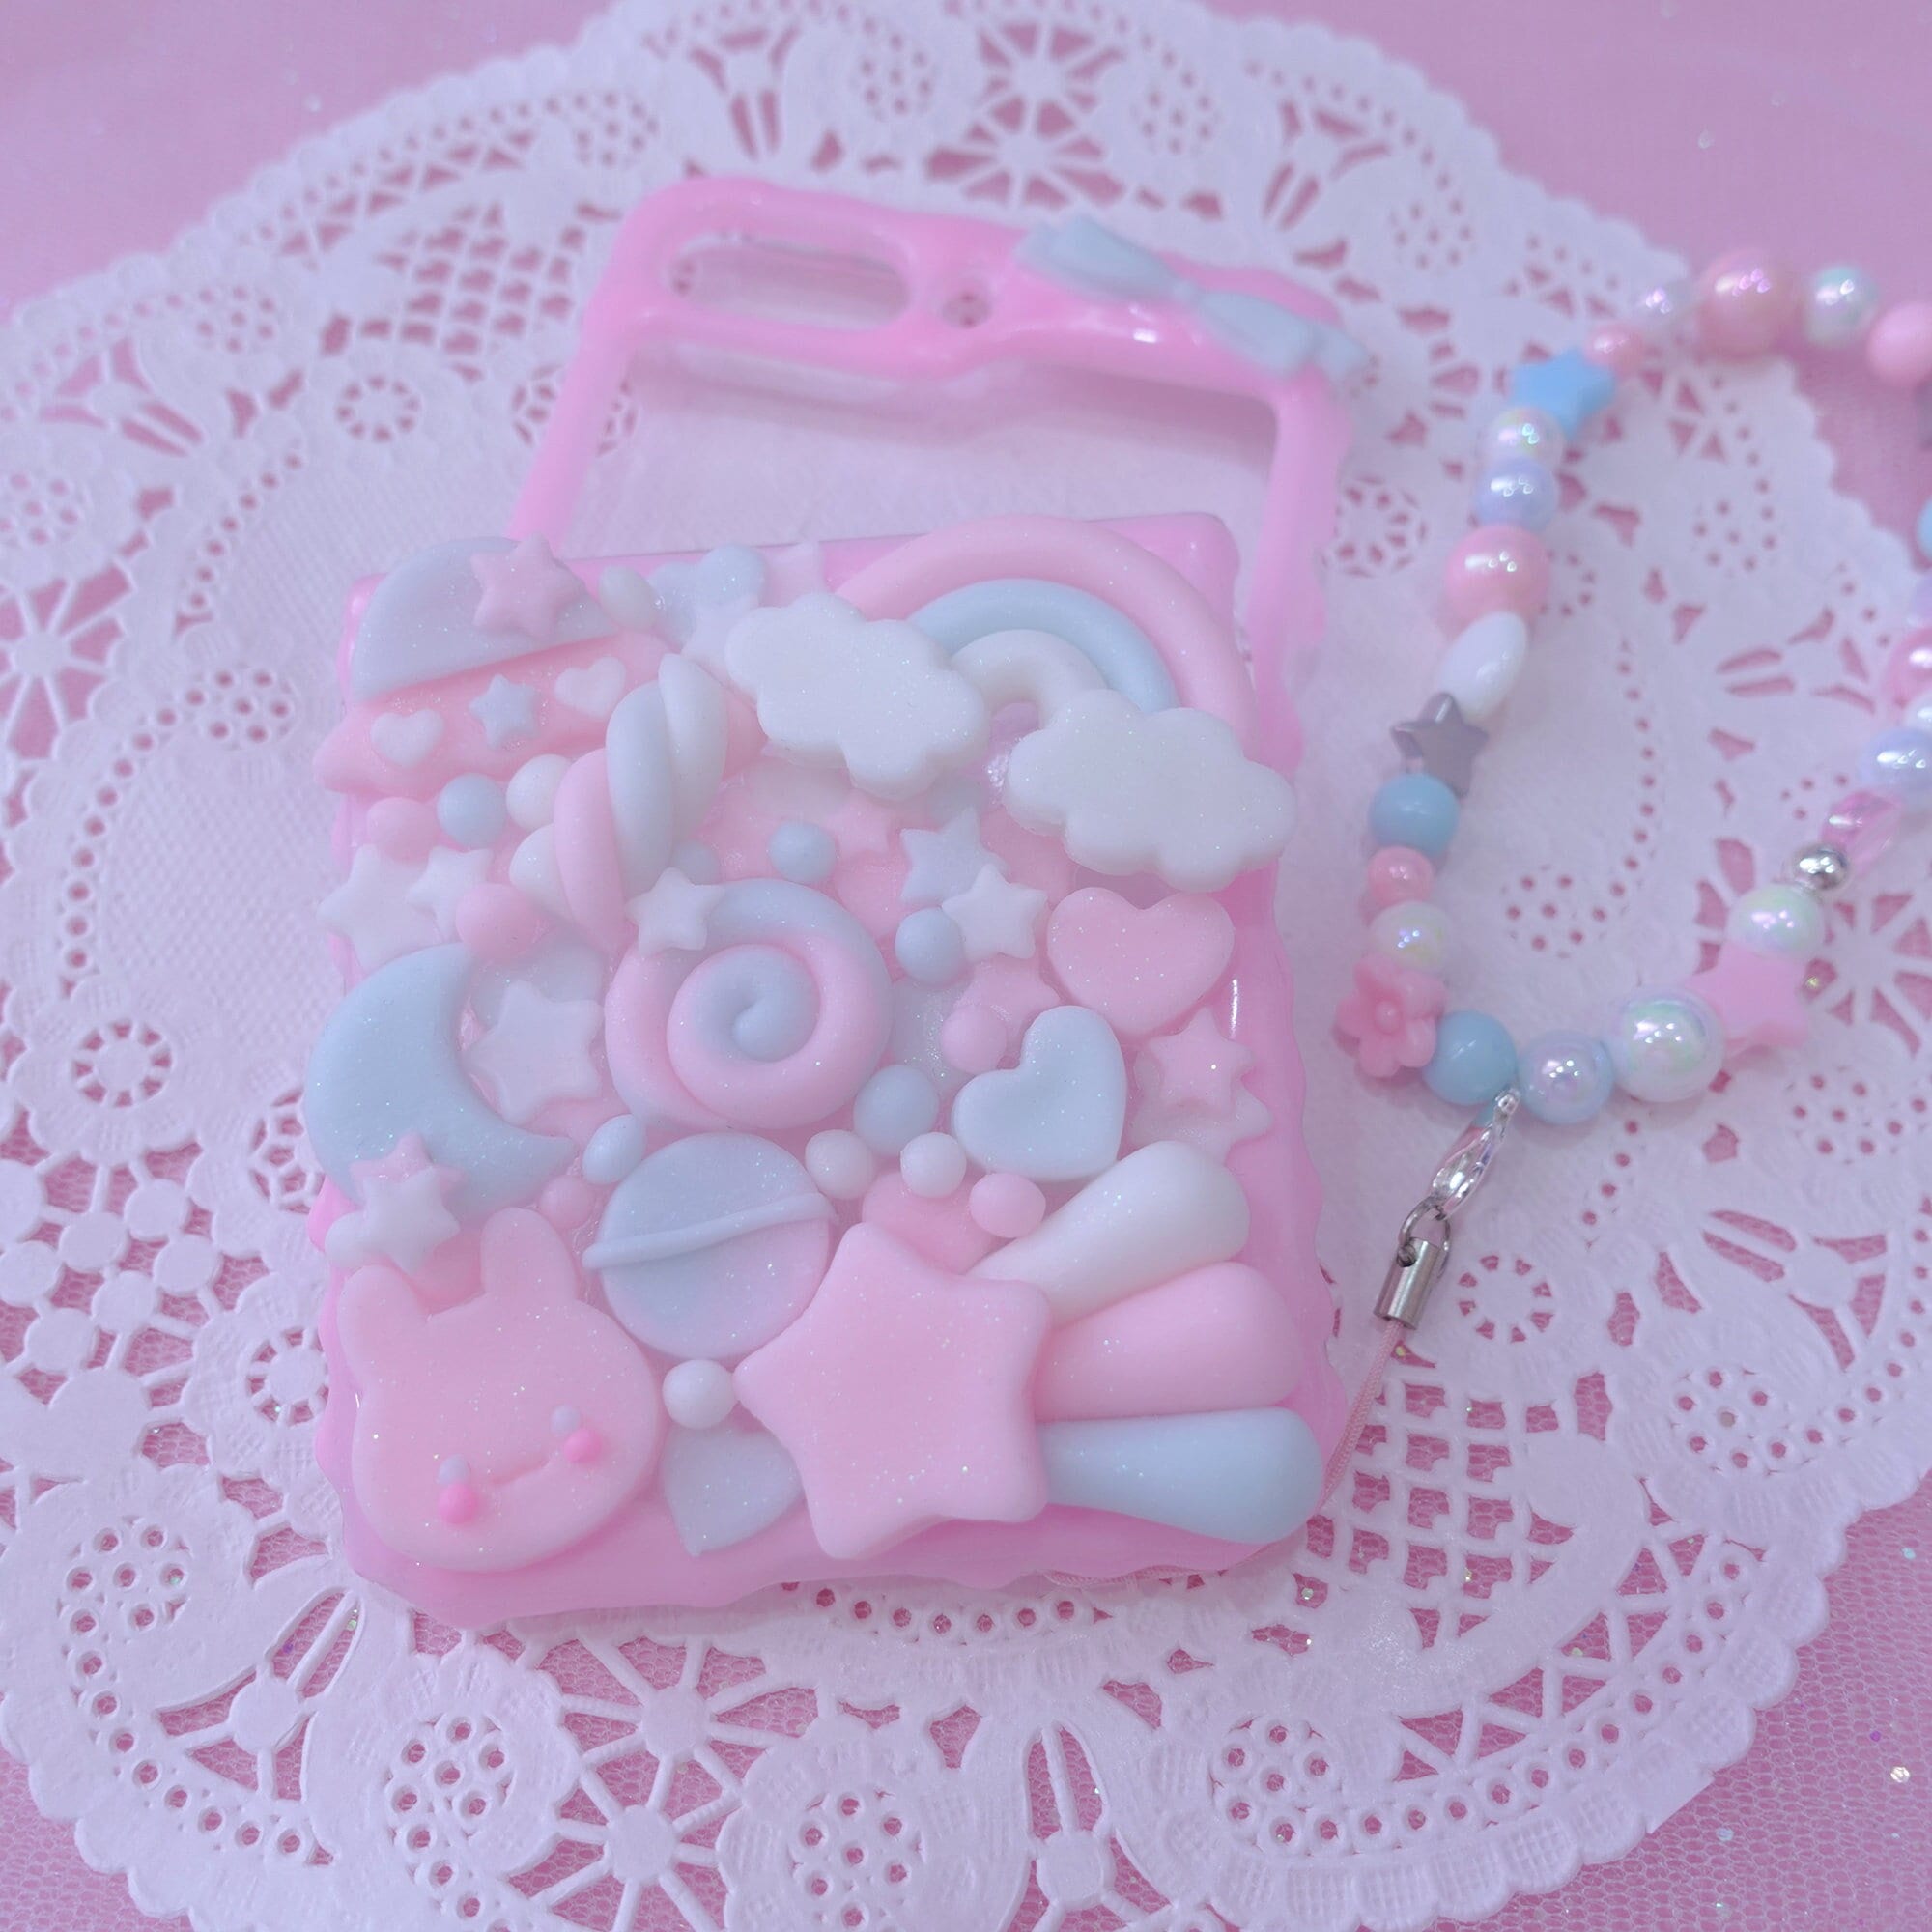 Kawaii Decoden Phone Case, Whipped Cream Effect Case, Cute iPhone Galaxy  Phone Case, Phone Shell, Available for Iphone, Samsung, Sony Etc. 